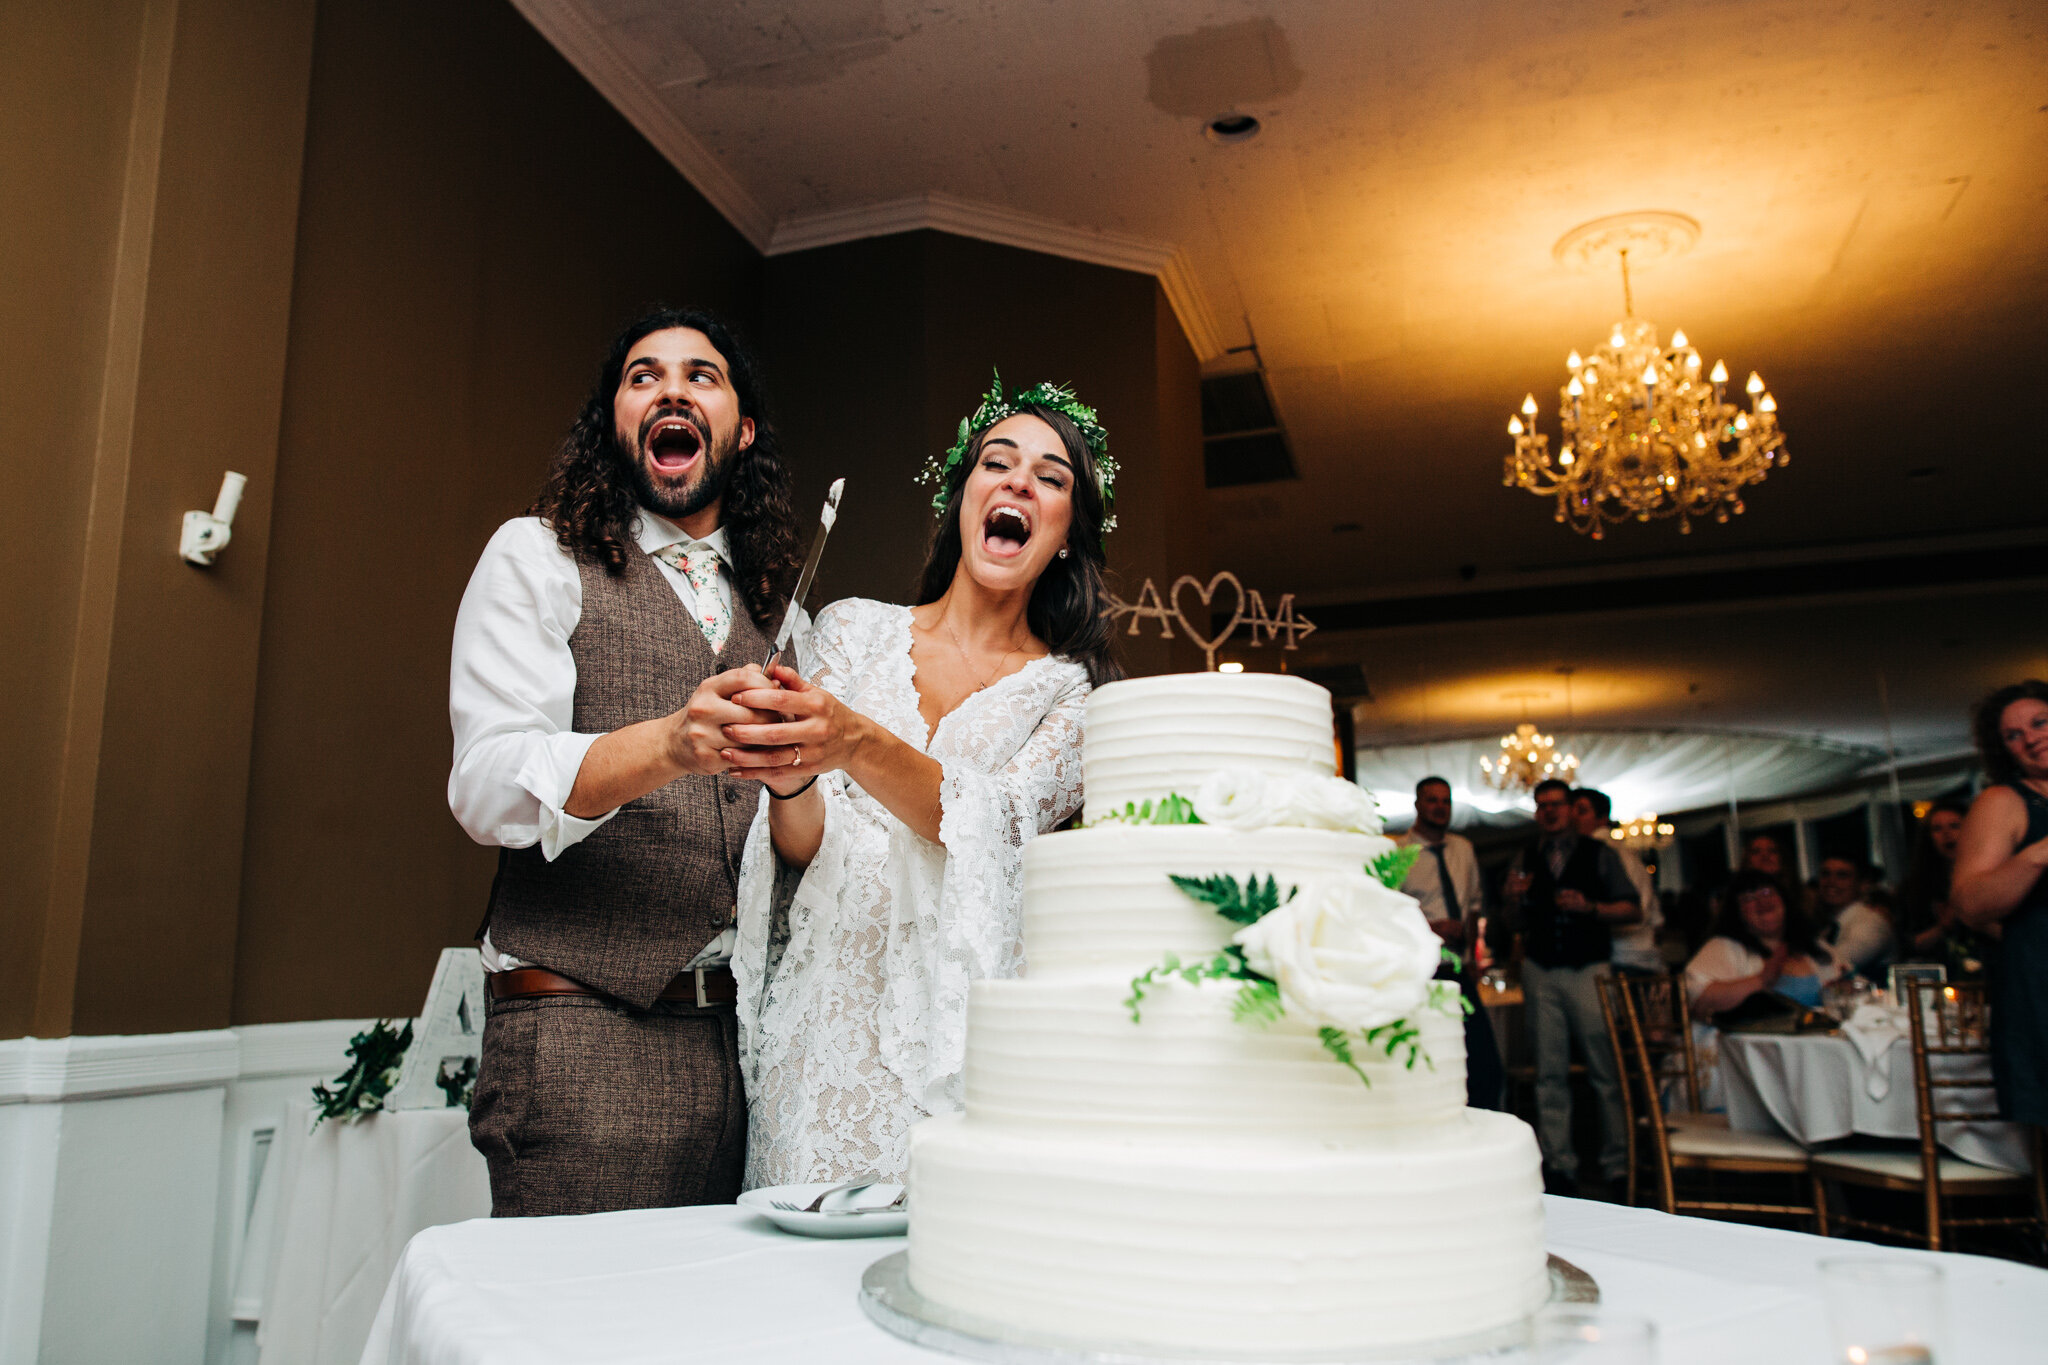 019-ROCKSTEADY IMAGES [Allie+Mike Wedding (Squarespace)]-ROQ30941.jpg